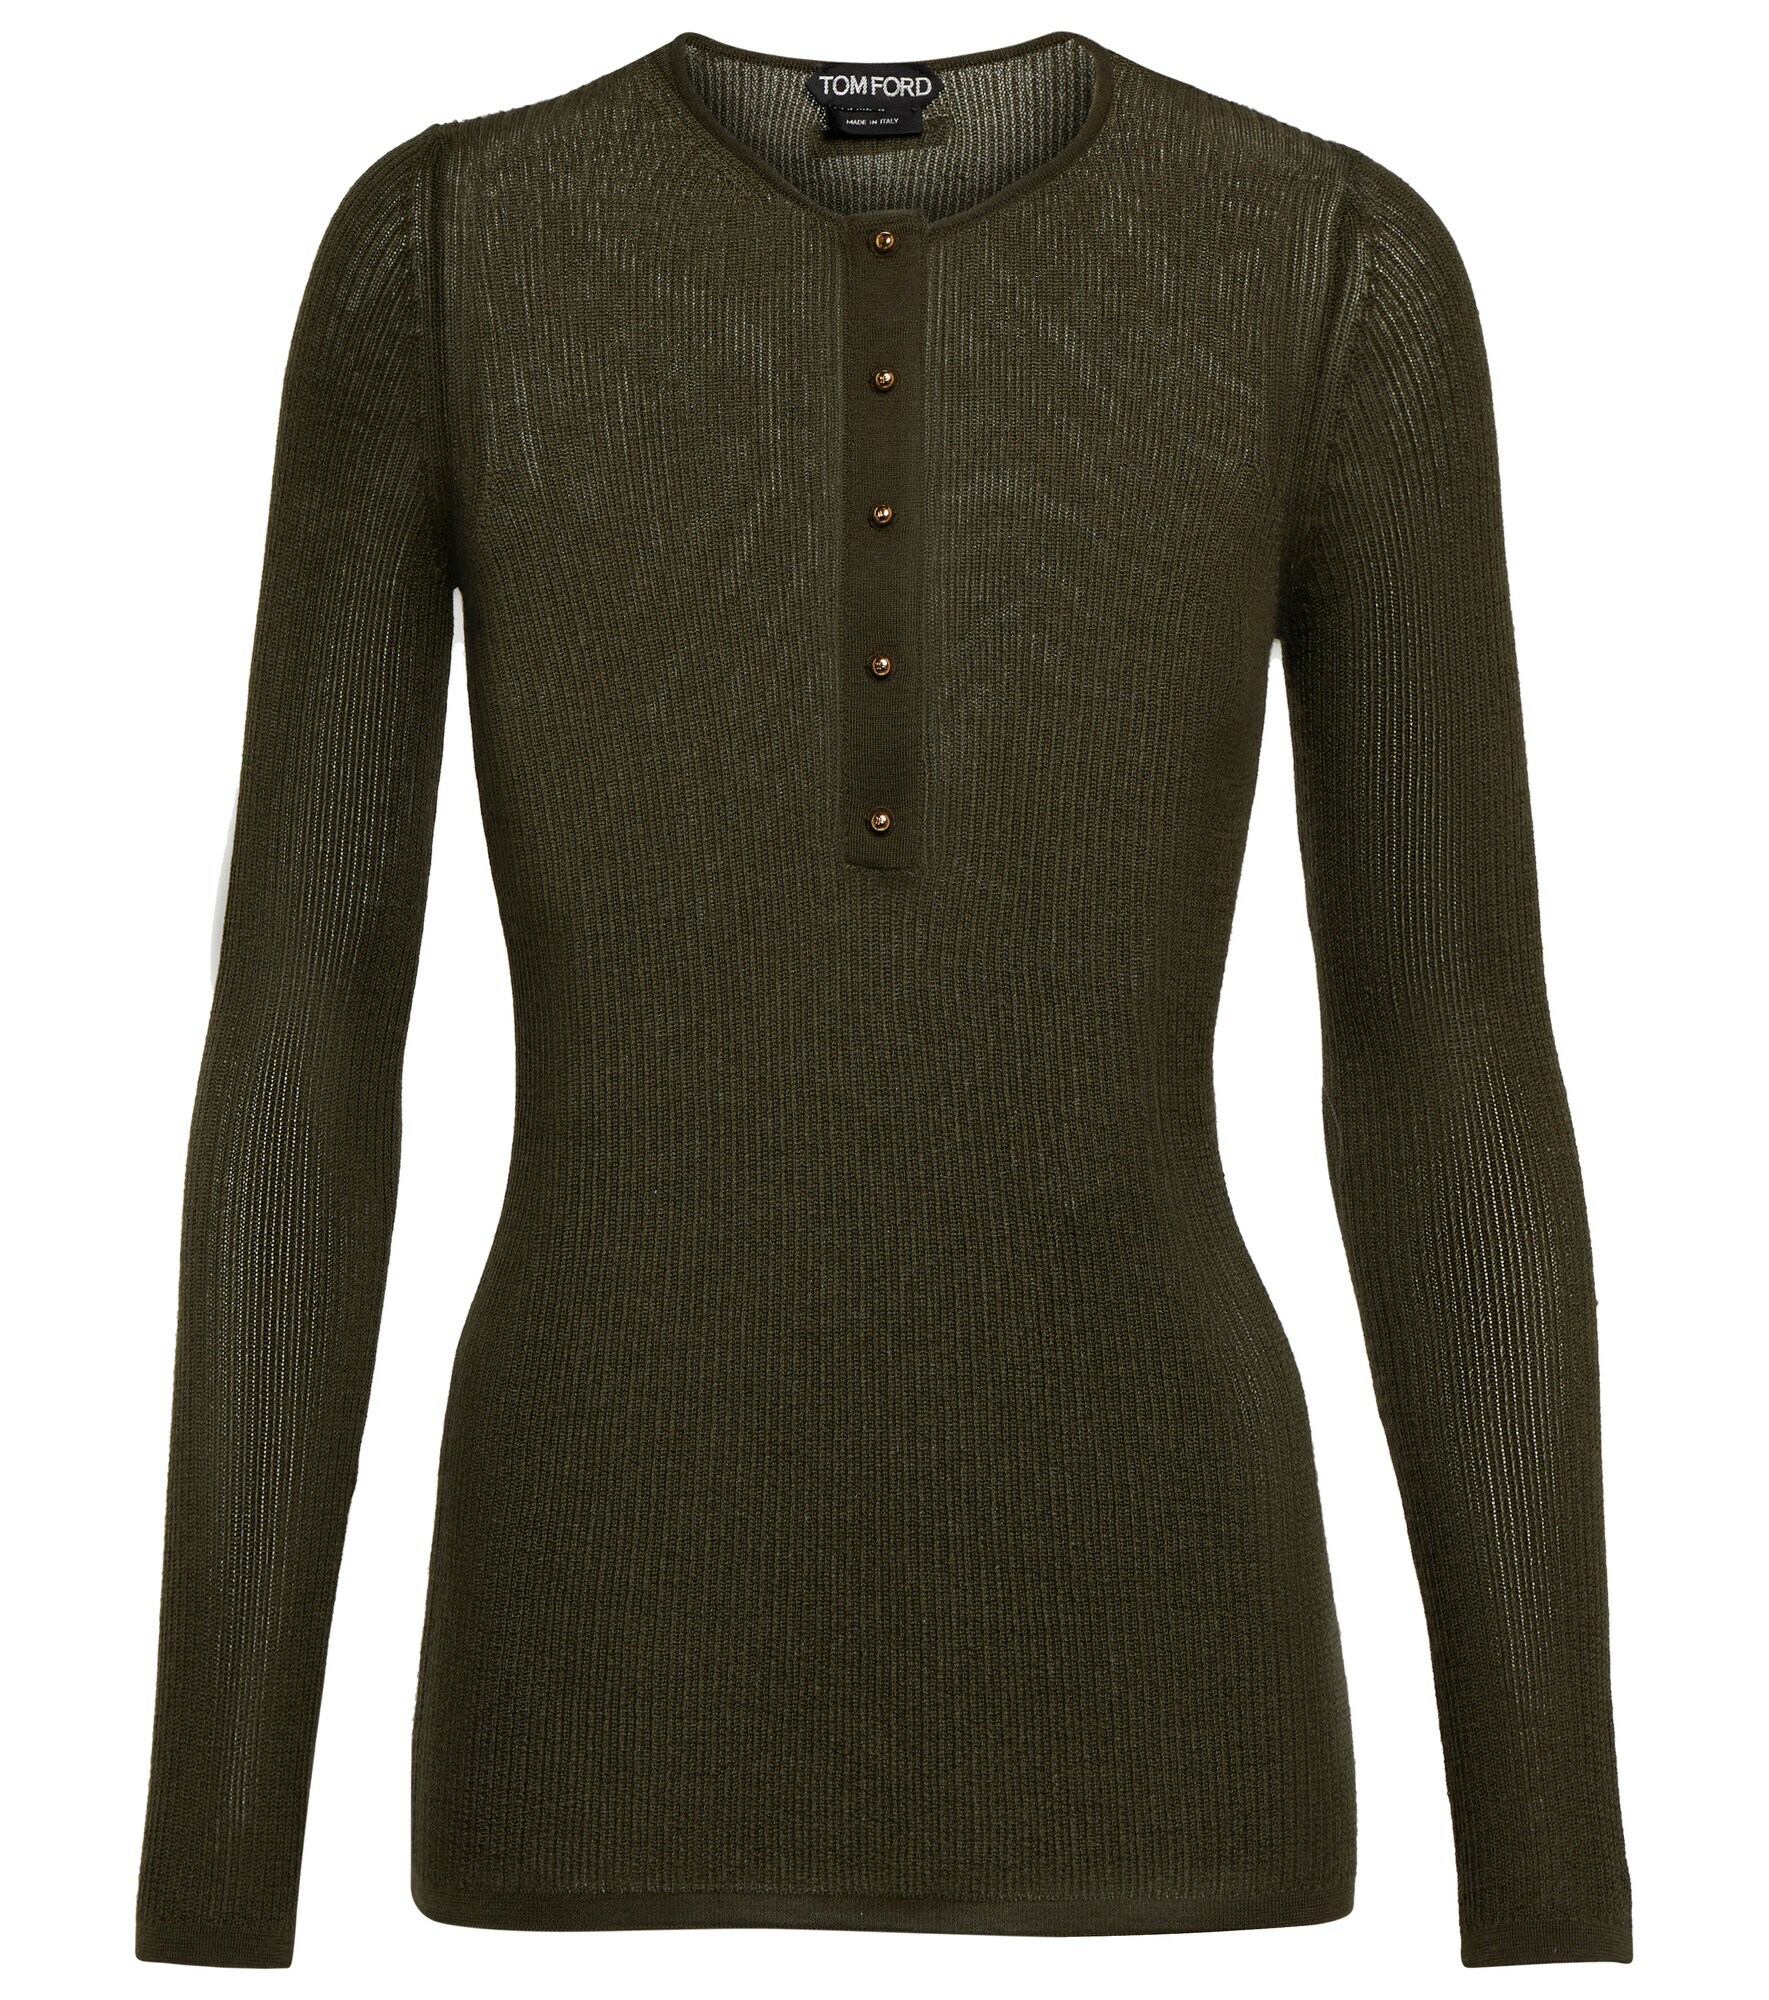 Tom Ford - Cashmere and silk knit sweater TOM FORD